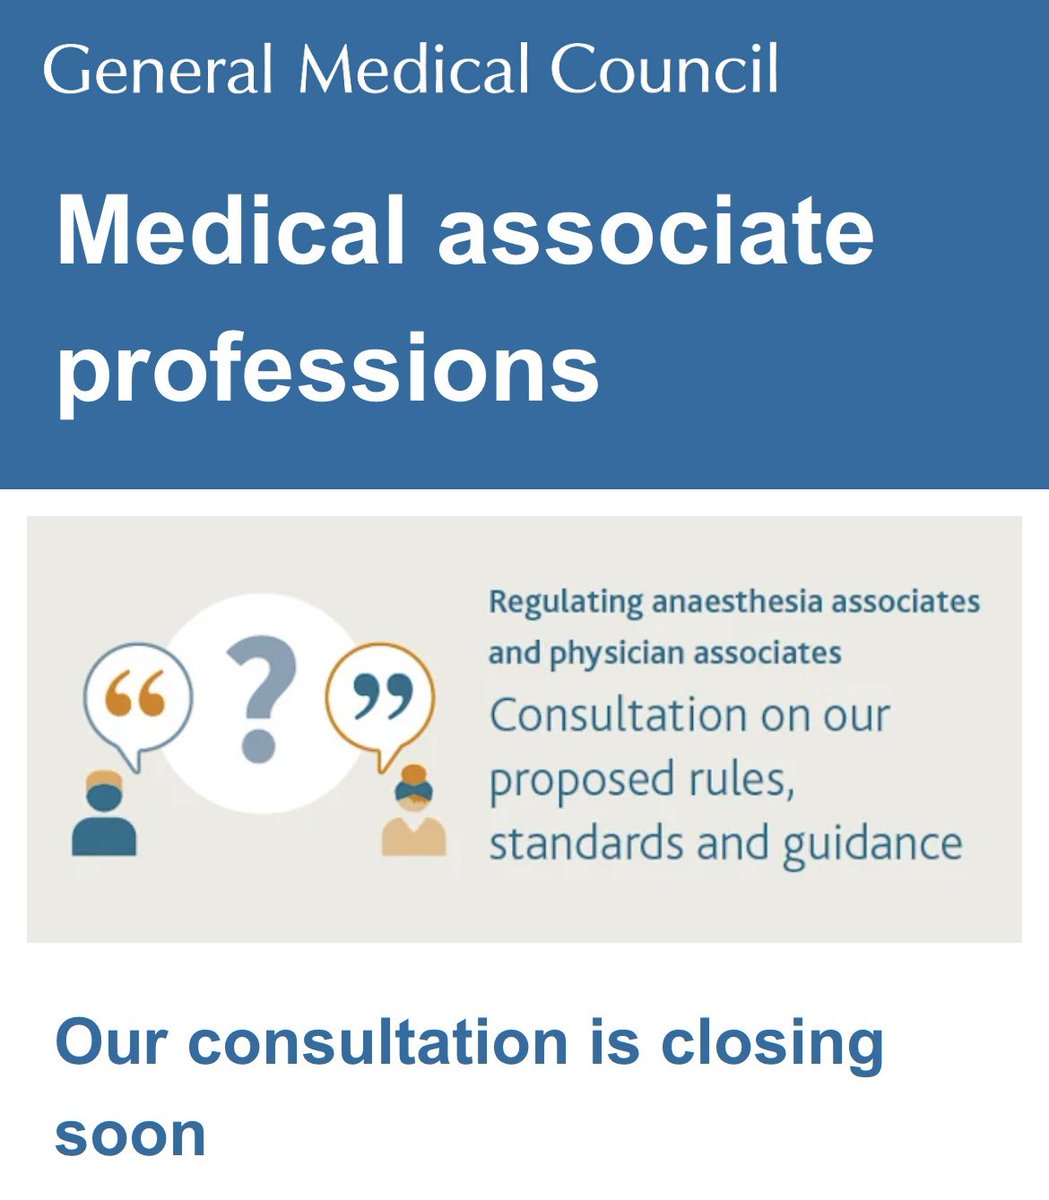 💥 The GMC’s public consultation on PAs closes on 20 May 💥 Please, please consider completing it. It’s not exactly user friendly - but your views matter. Make them heard 🙏 gmc-news.org/cr/AQiW_gcQuqy…